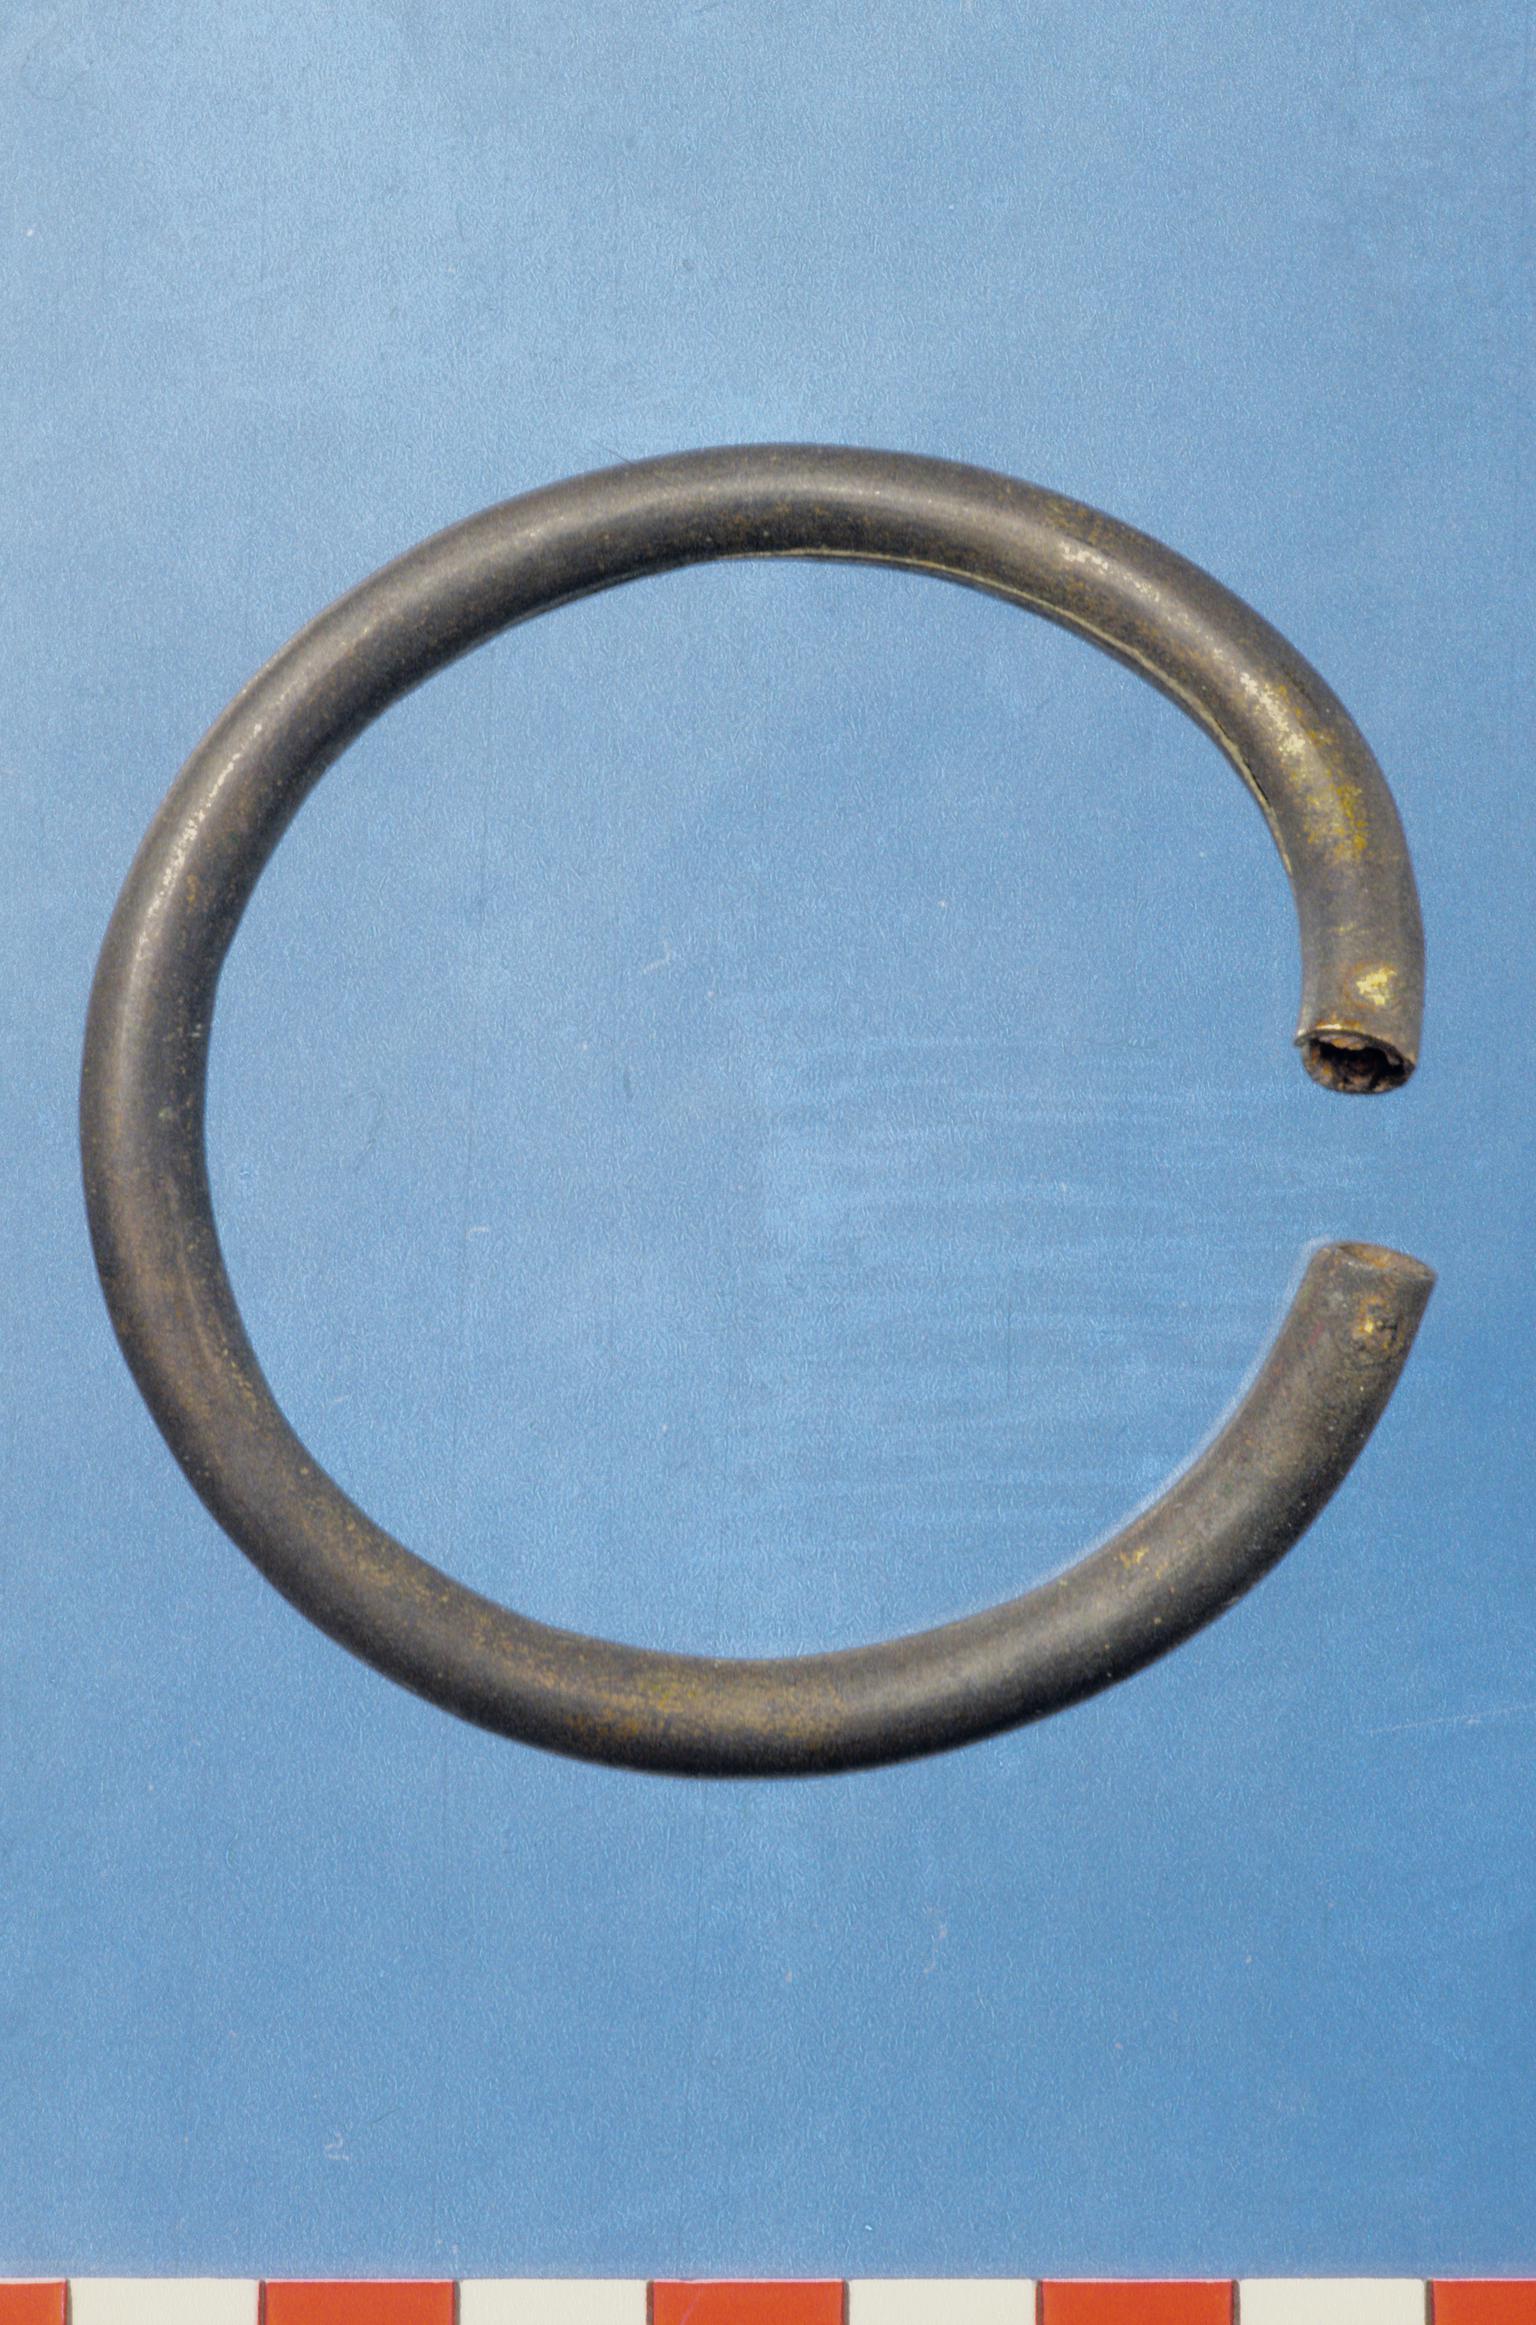 Late Iron Age copper alloy rein ring